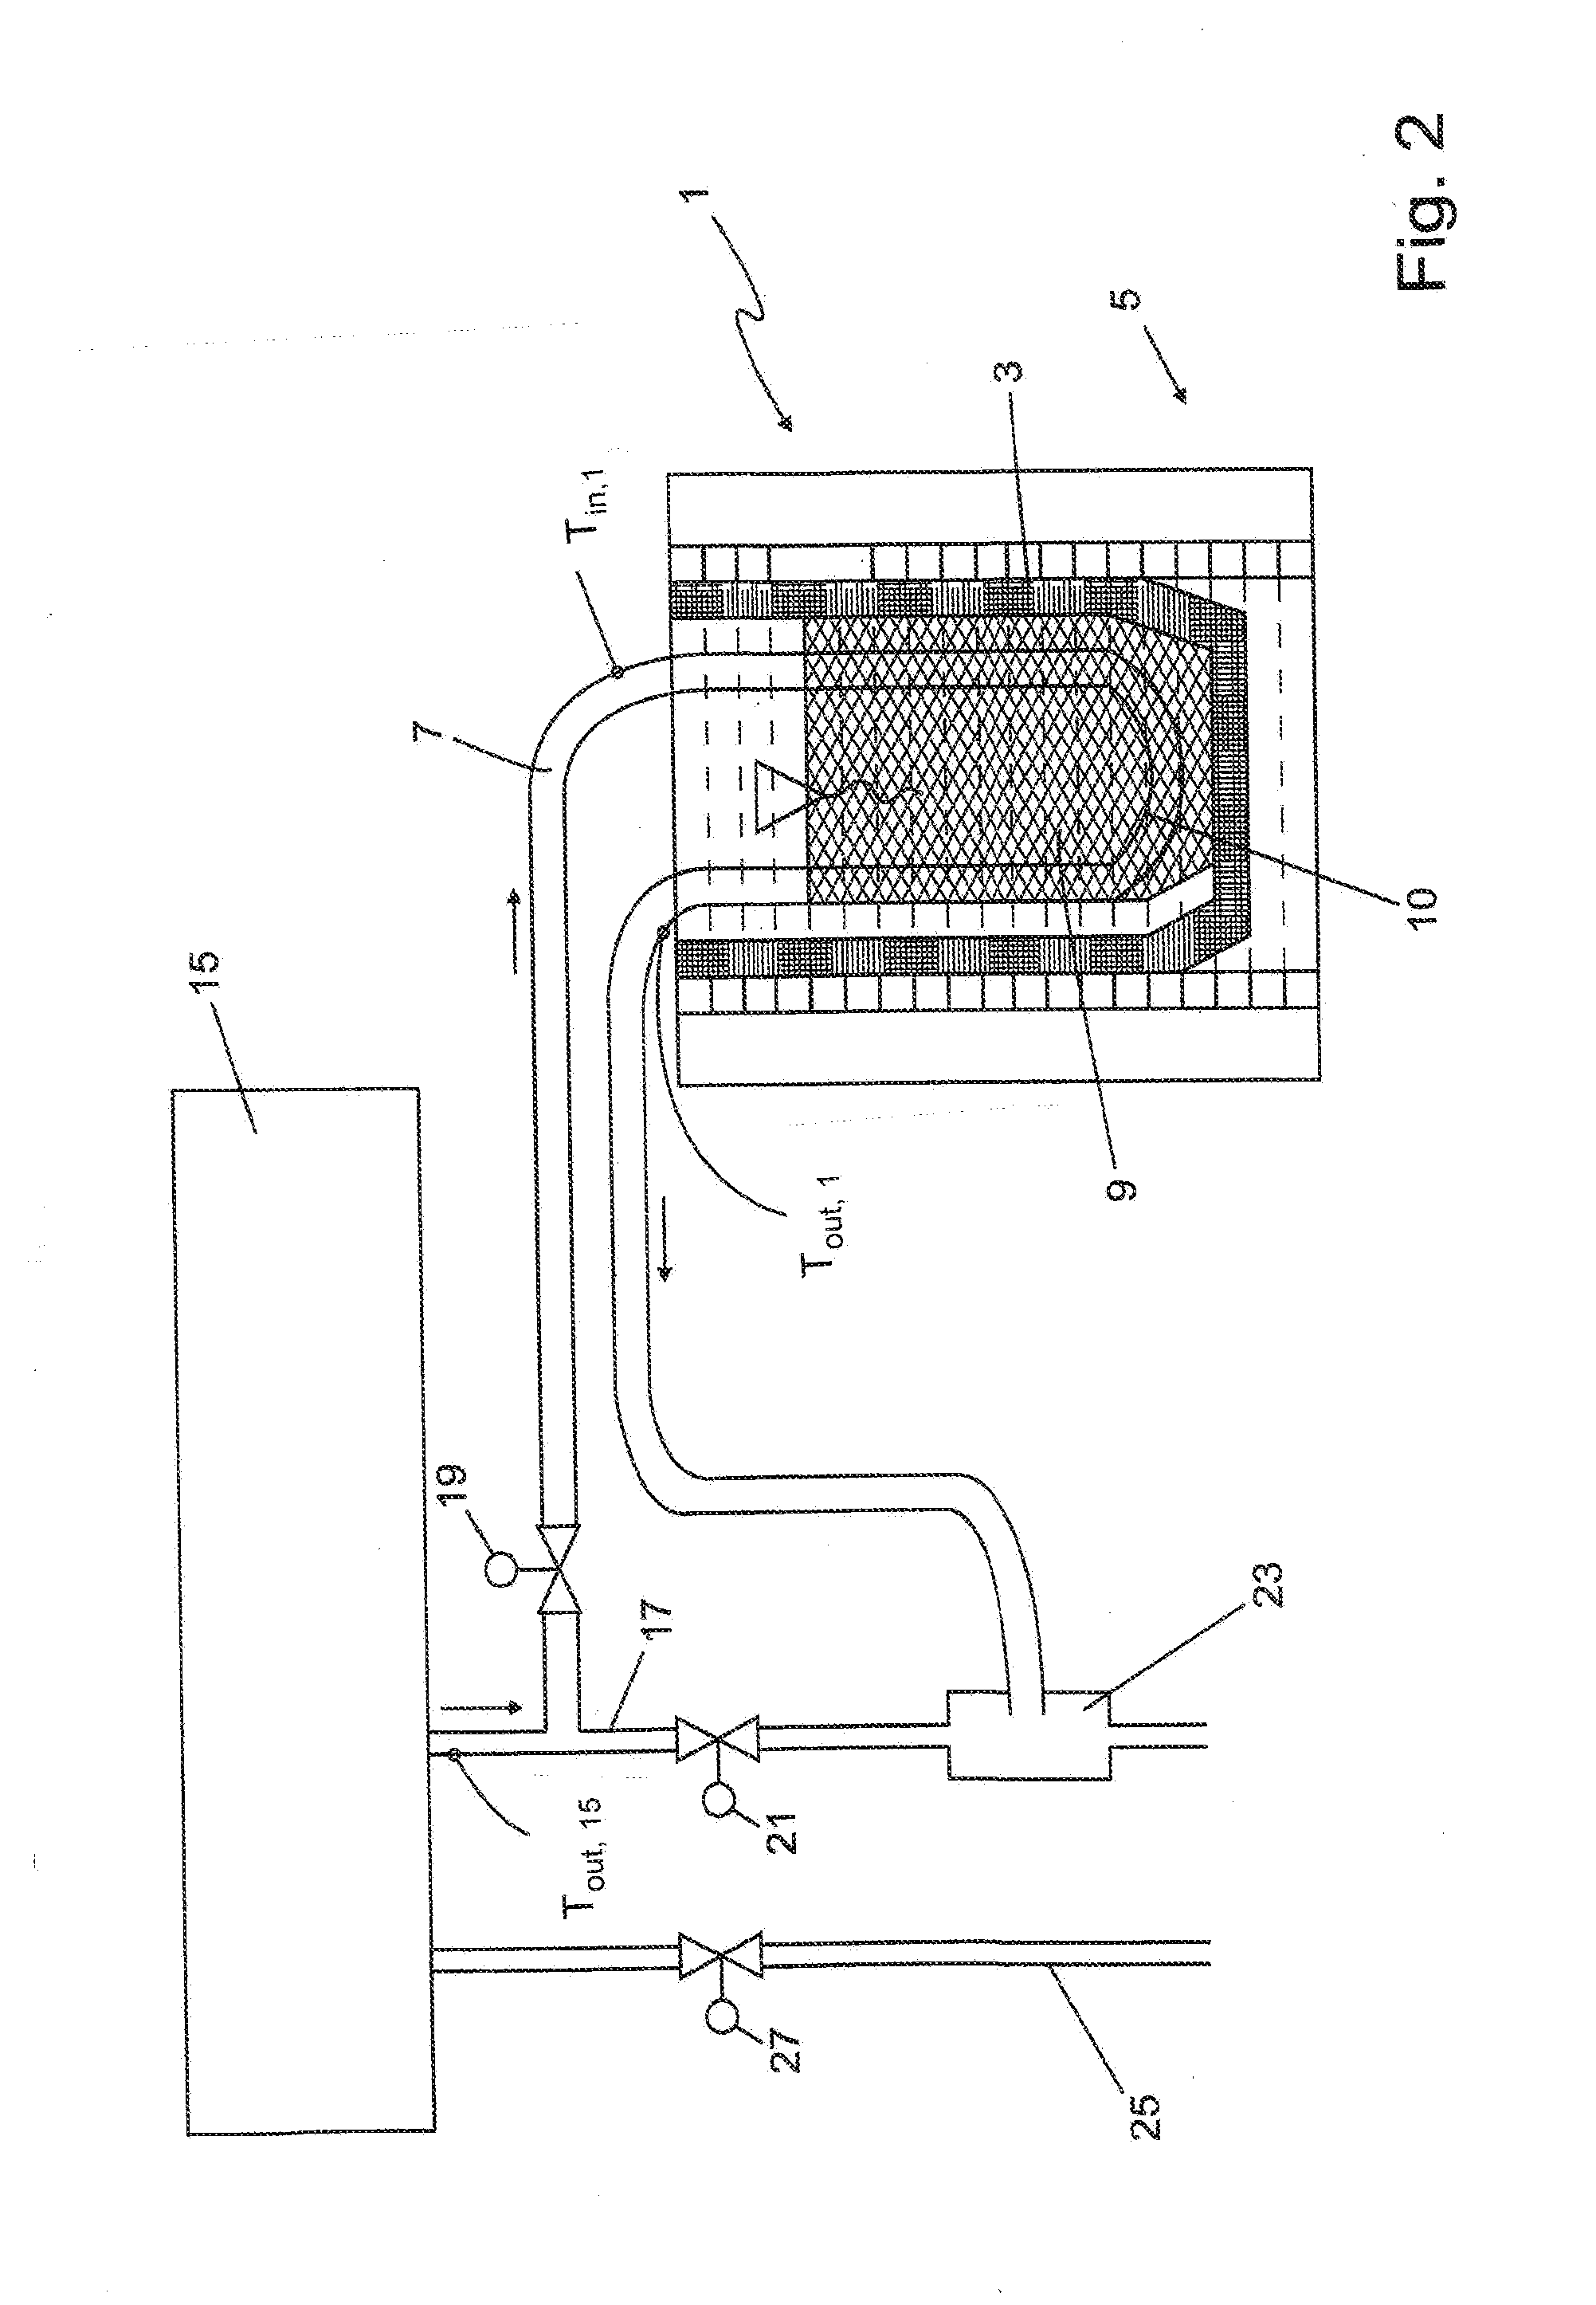 High-temperature thermal storage device with induction heating and molten metal, and thermal storage-composite system